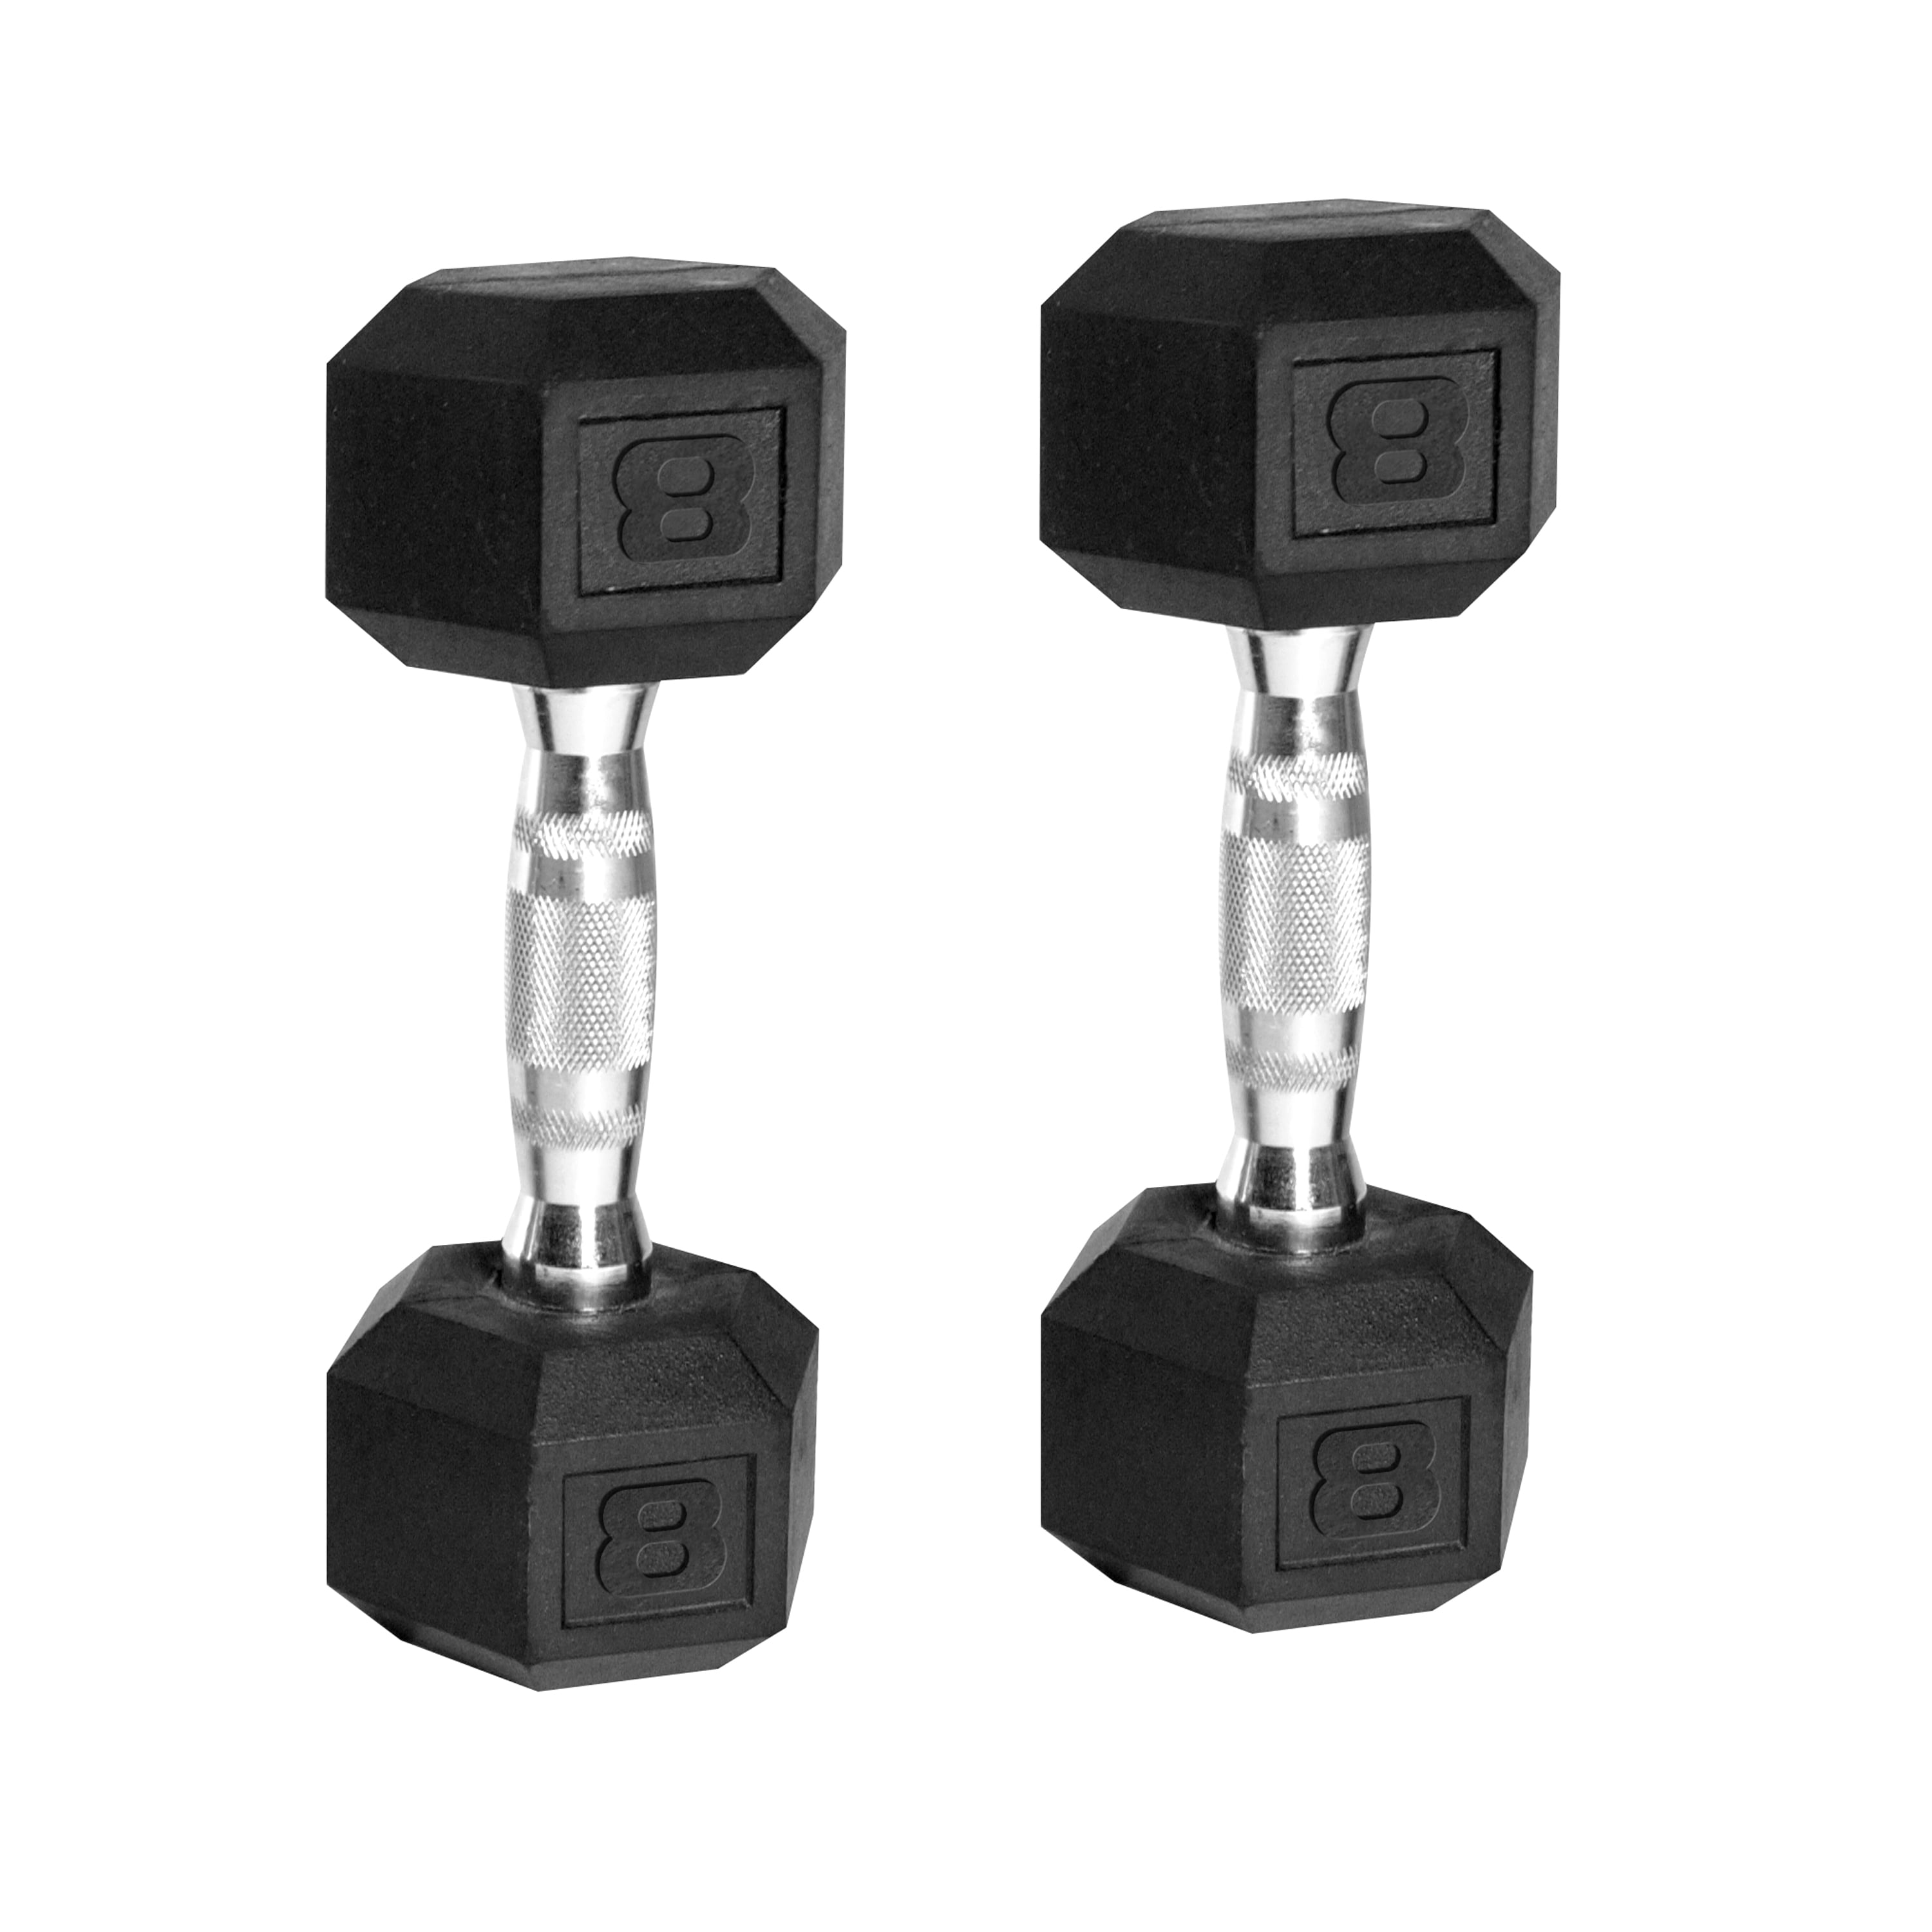 SET OF 2 CAST IRON HEX DUMBBELLS Home Fitness Gym Barbell Workout Weights PAIR